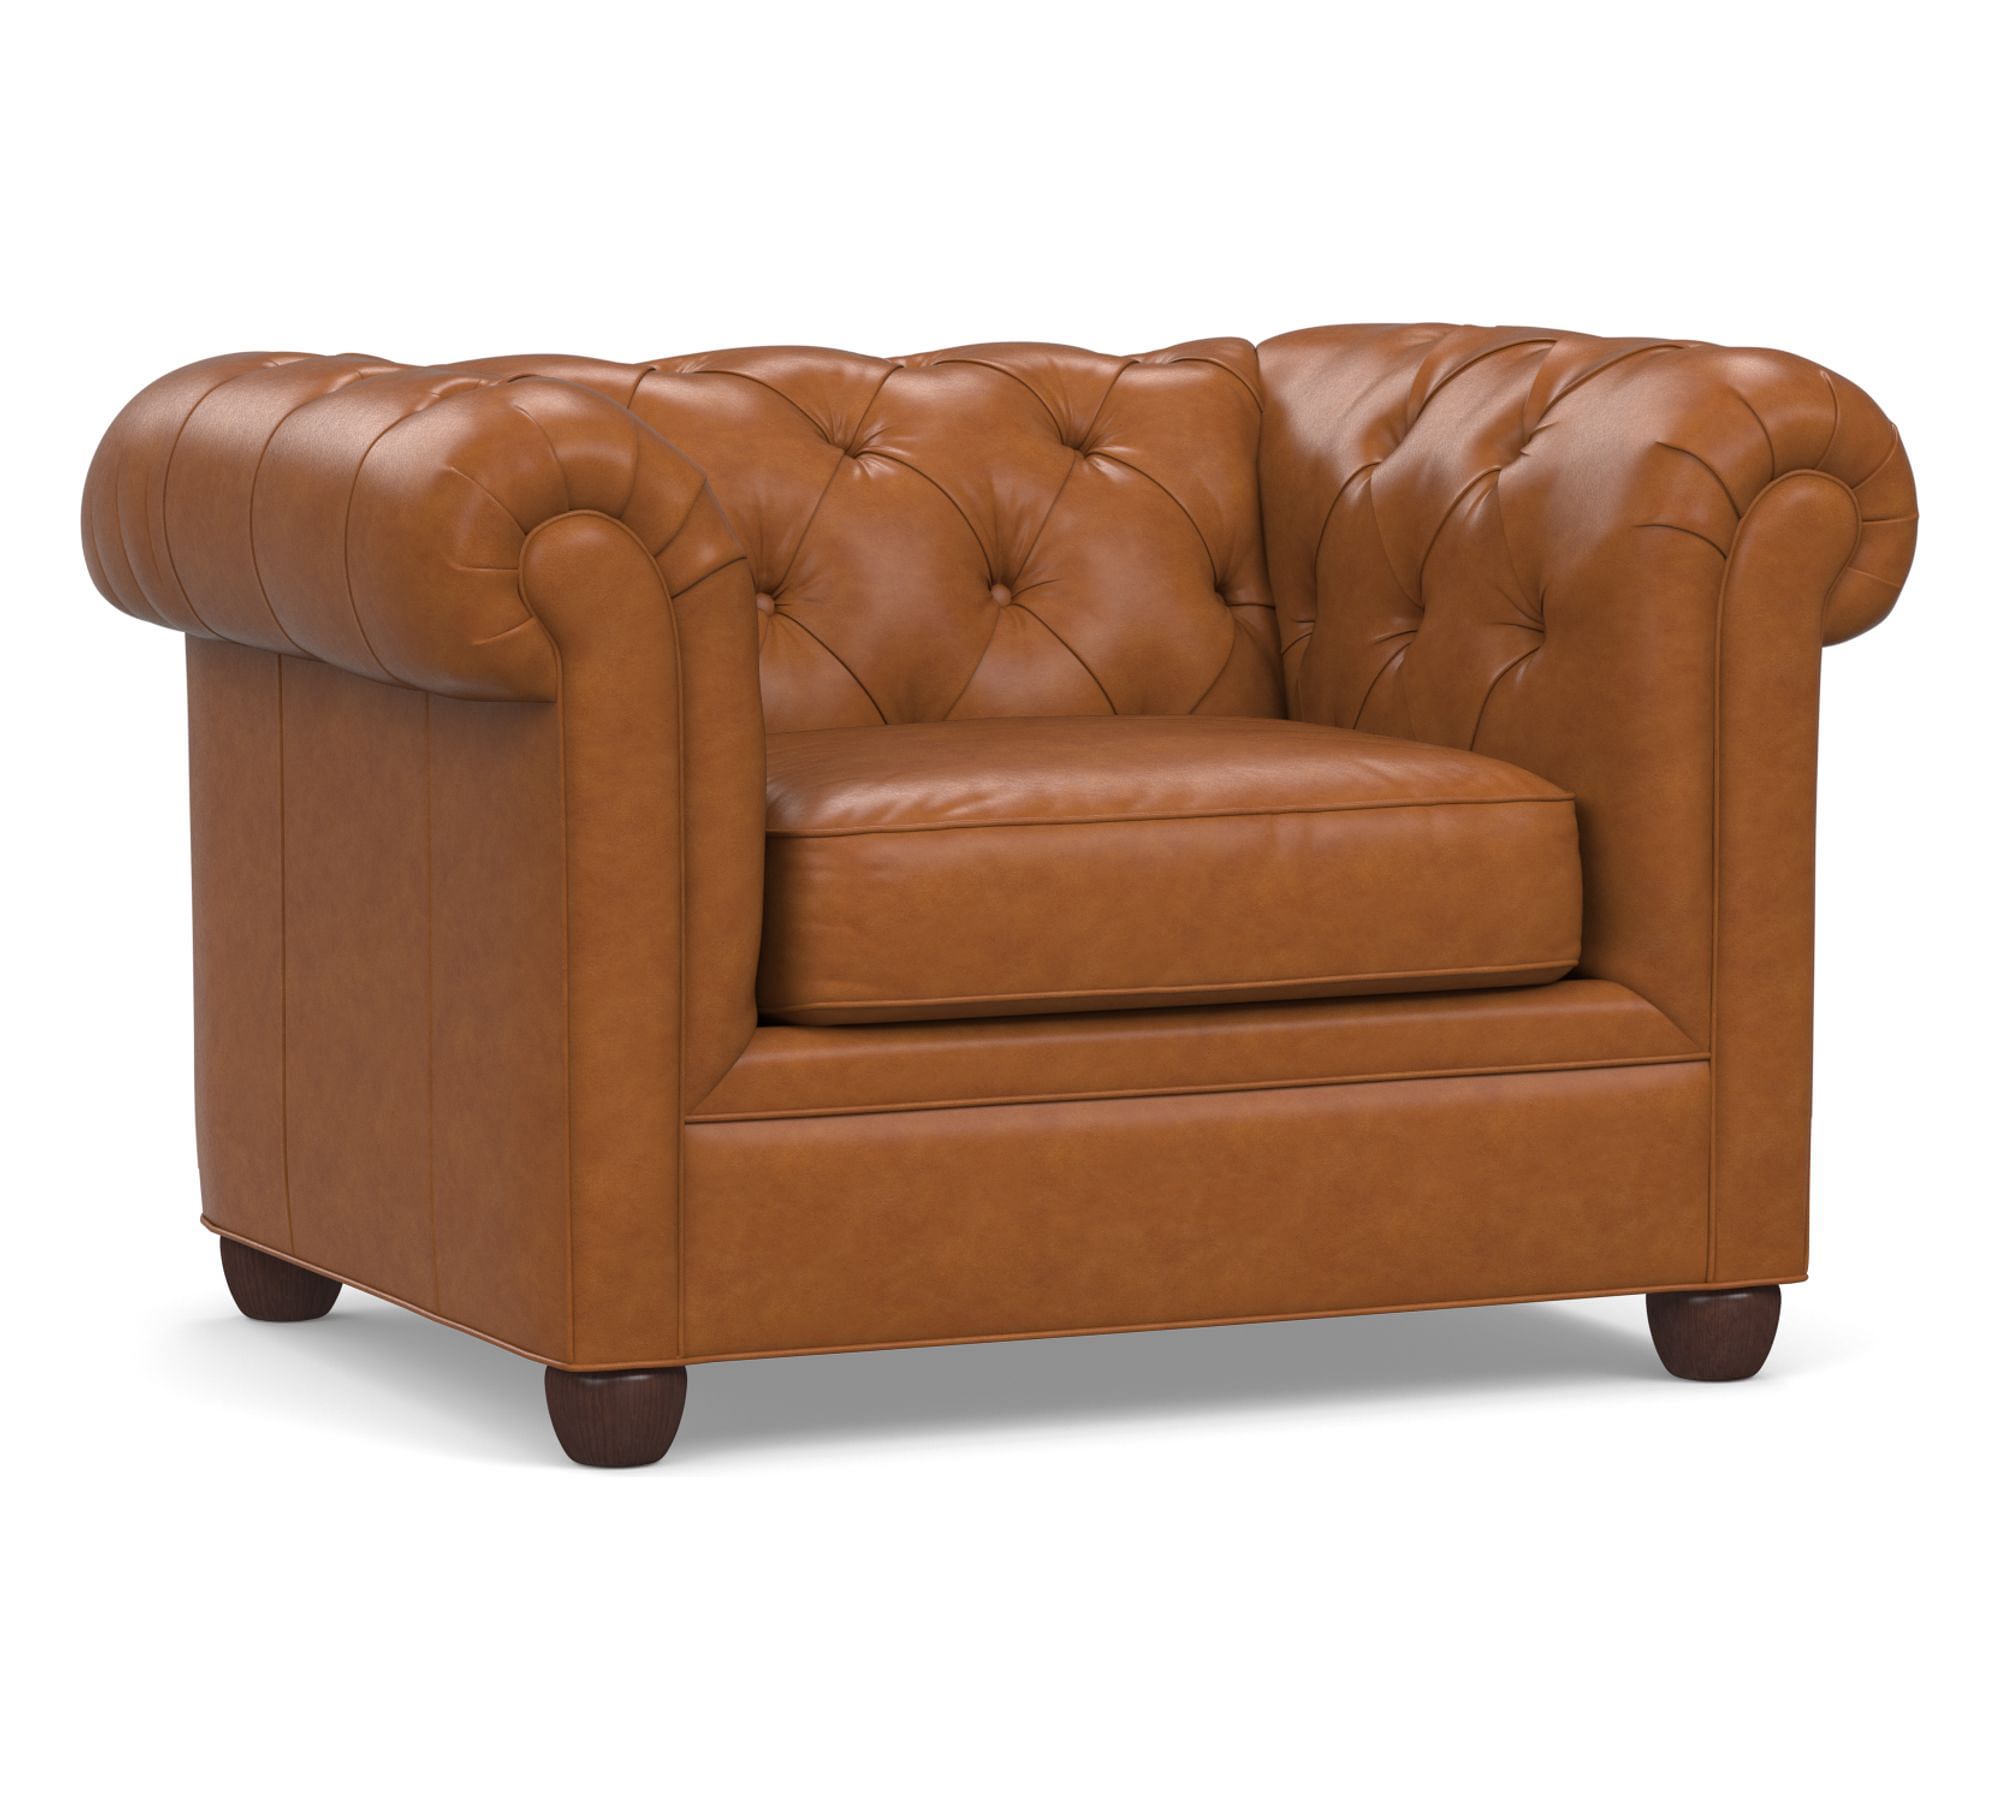 Chesterfield Roll Arm Leather Chair